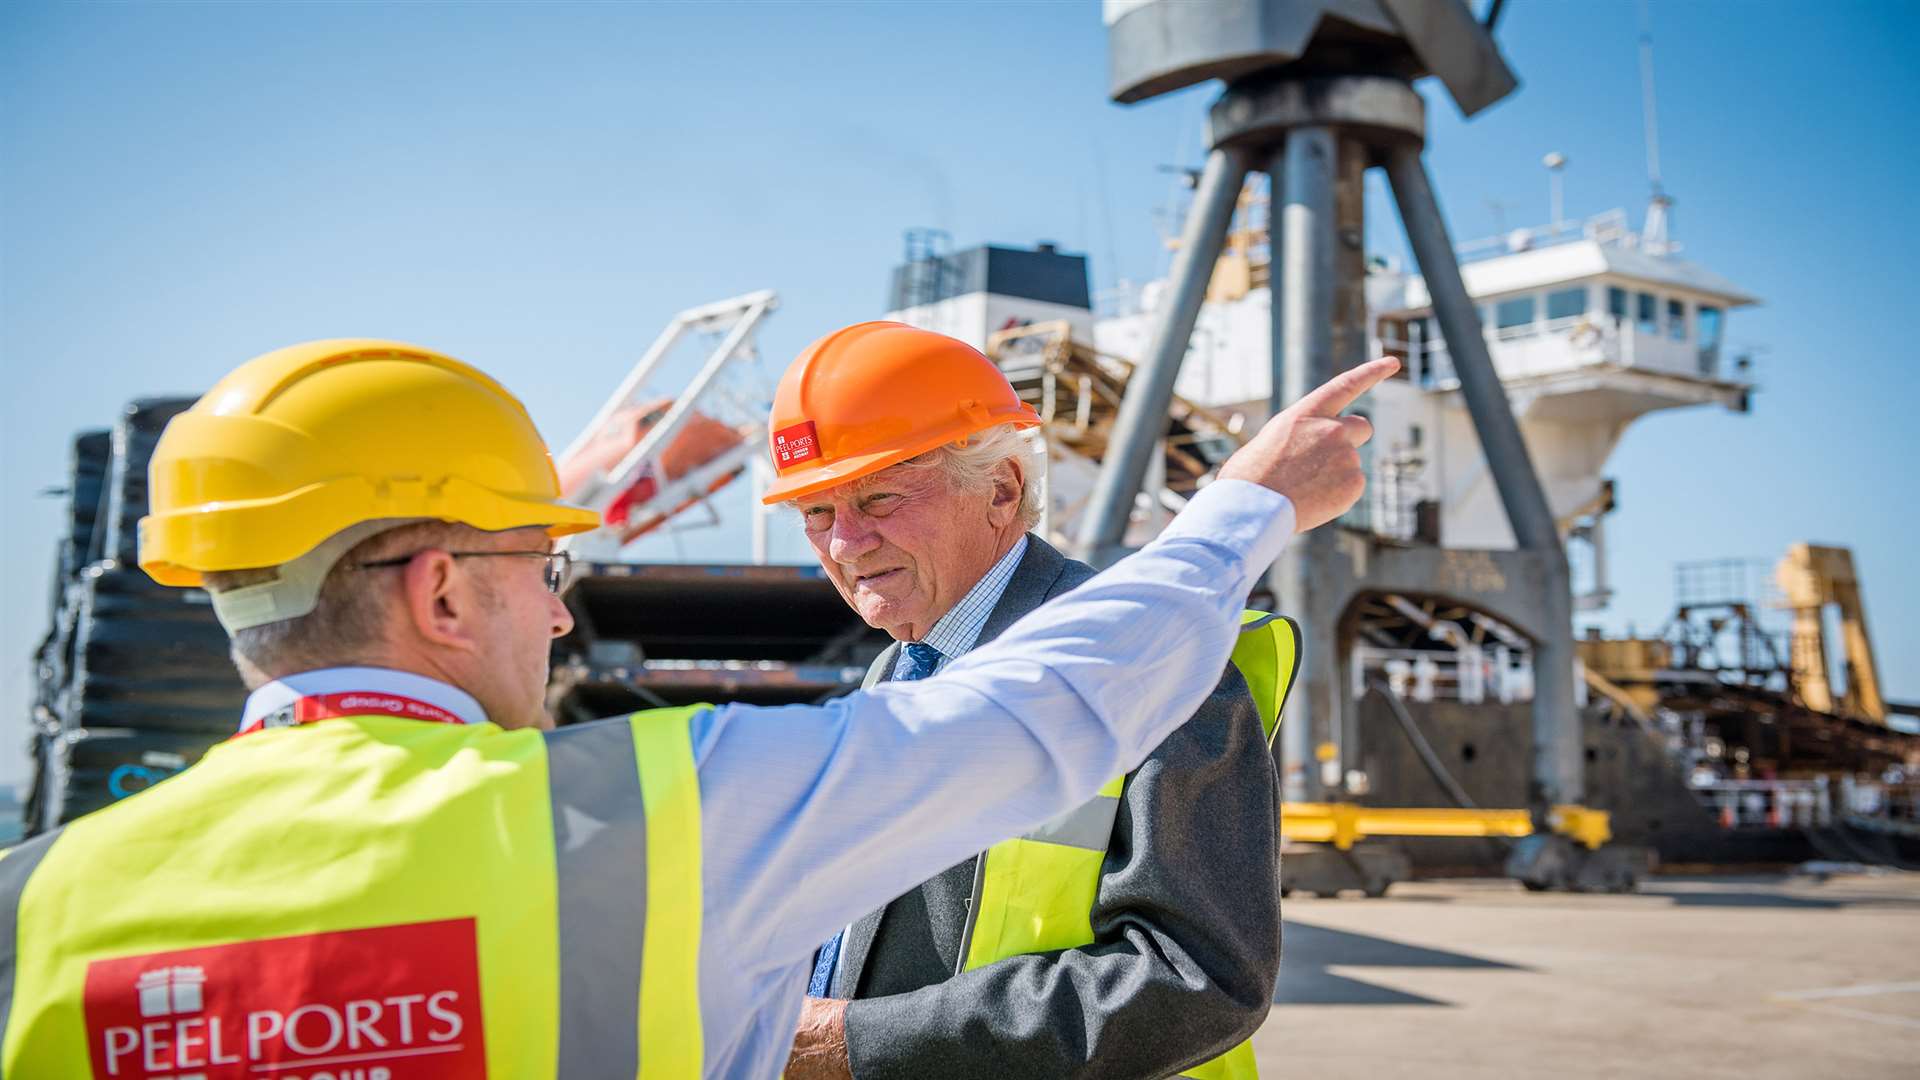 Paul Barker, port director at Peel Ports London Medway, and Lord Heseltine during their tour of the Port of Sheerness